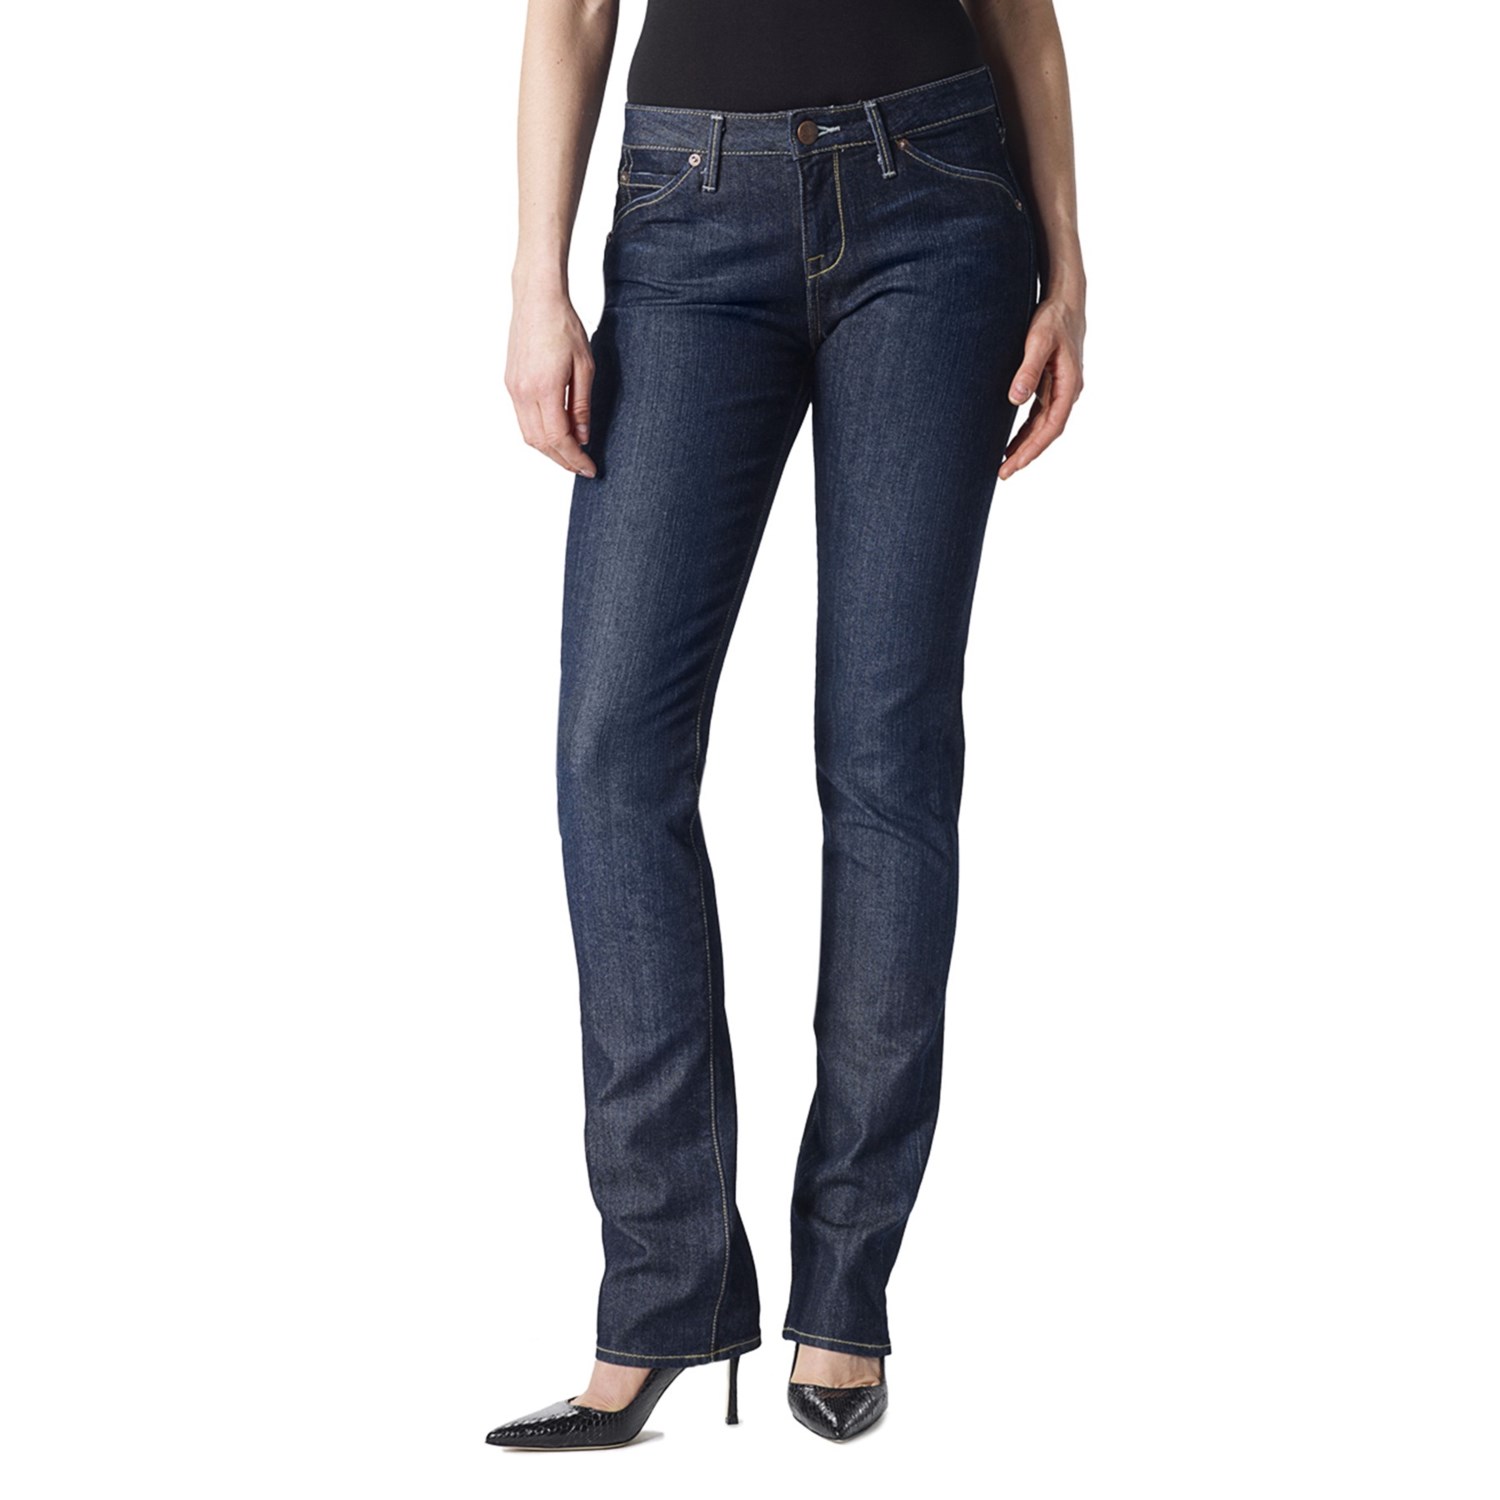 Agave Nectar Athena Jeans - Relaxed Fit, Straight Leg, High Rise (For ...